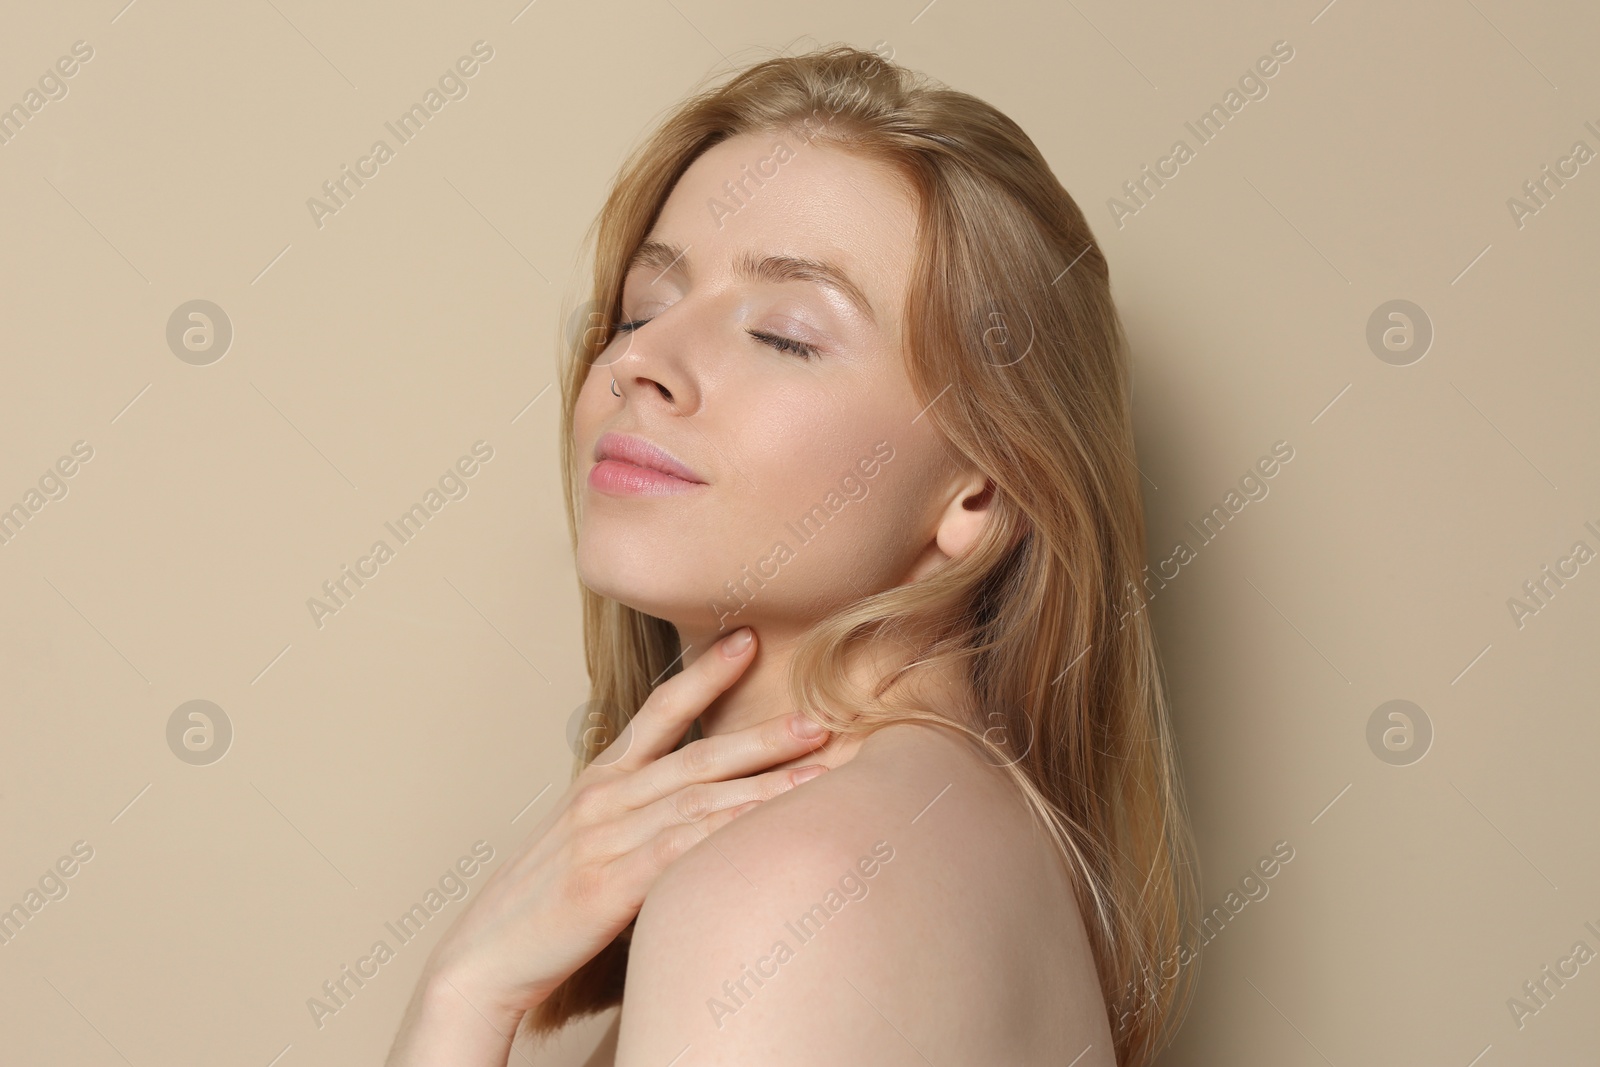 Photo of Portrait of beautiful young woman on beige background